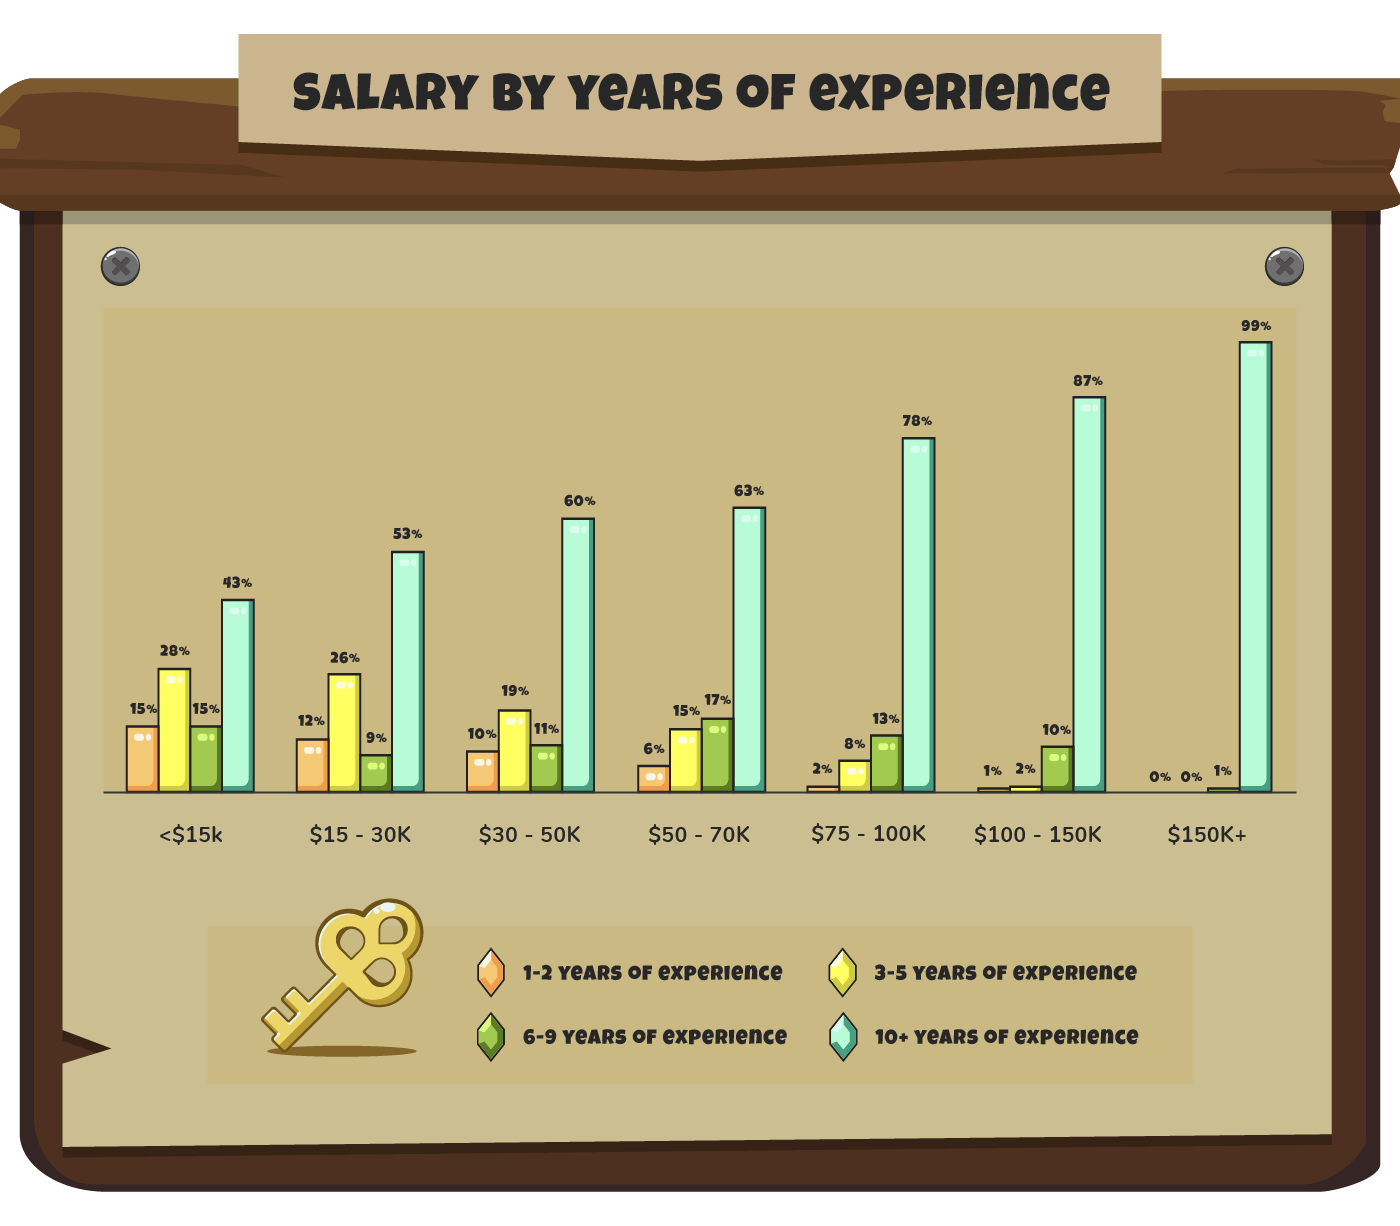 Salary by years of experience